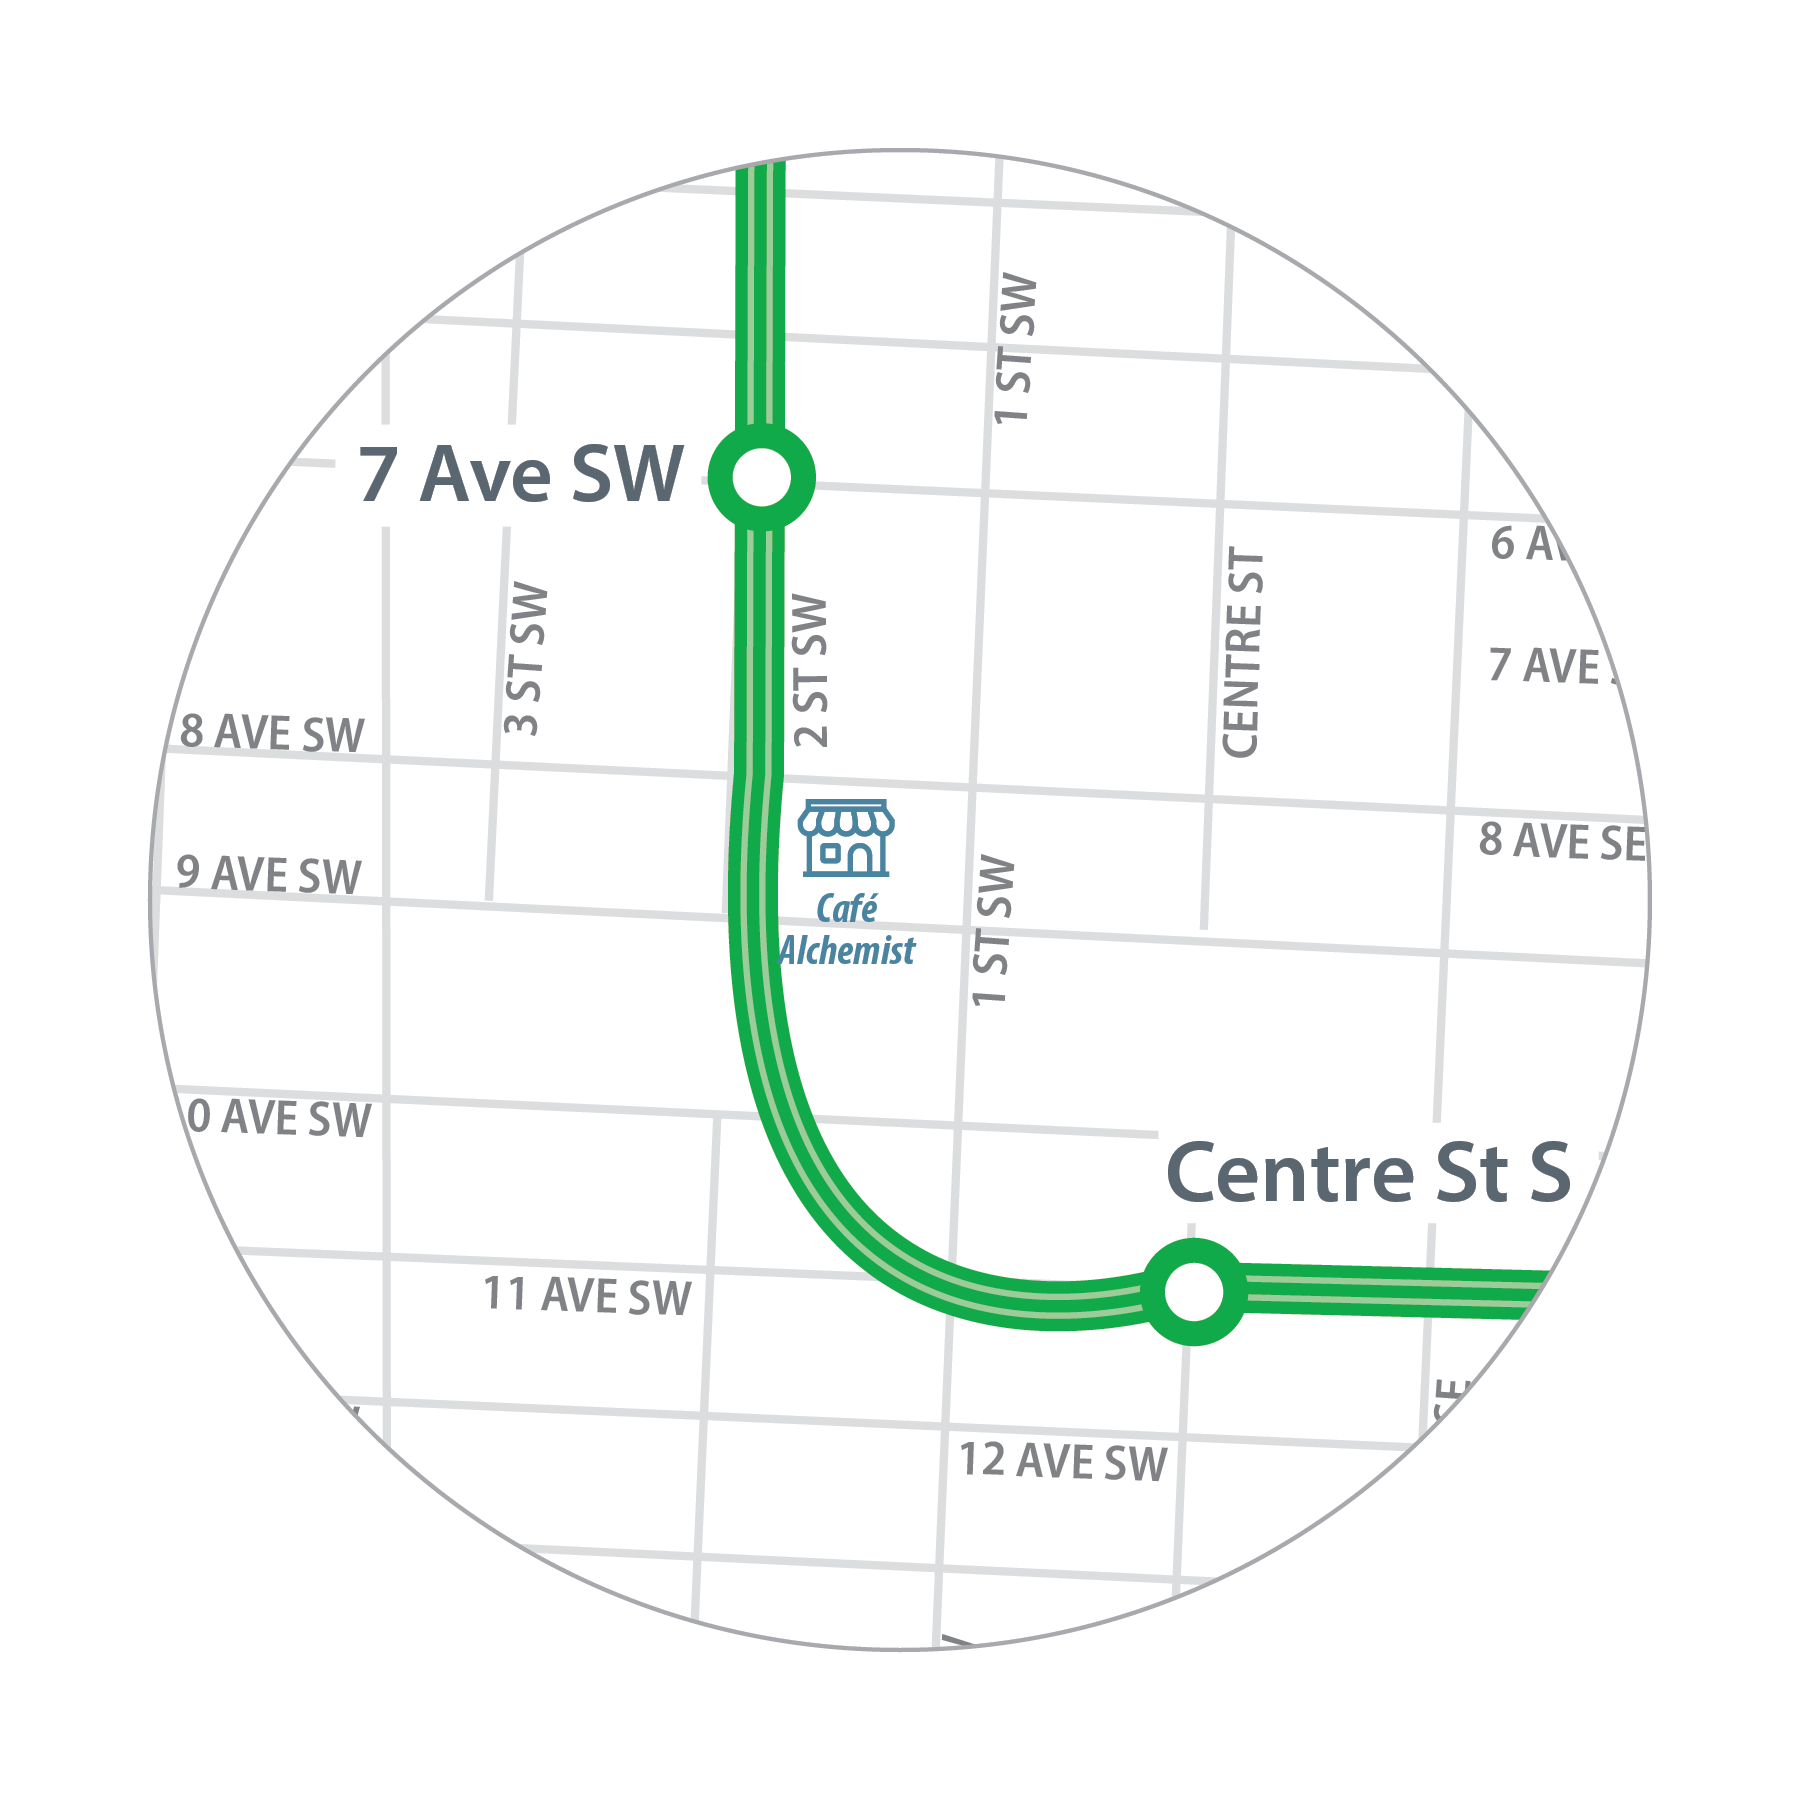 Map of Cafe Alchemist location in relation to 7 Avenue S.W. and Centre Street S. Stations.